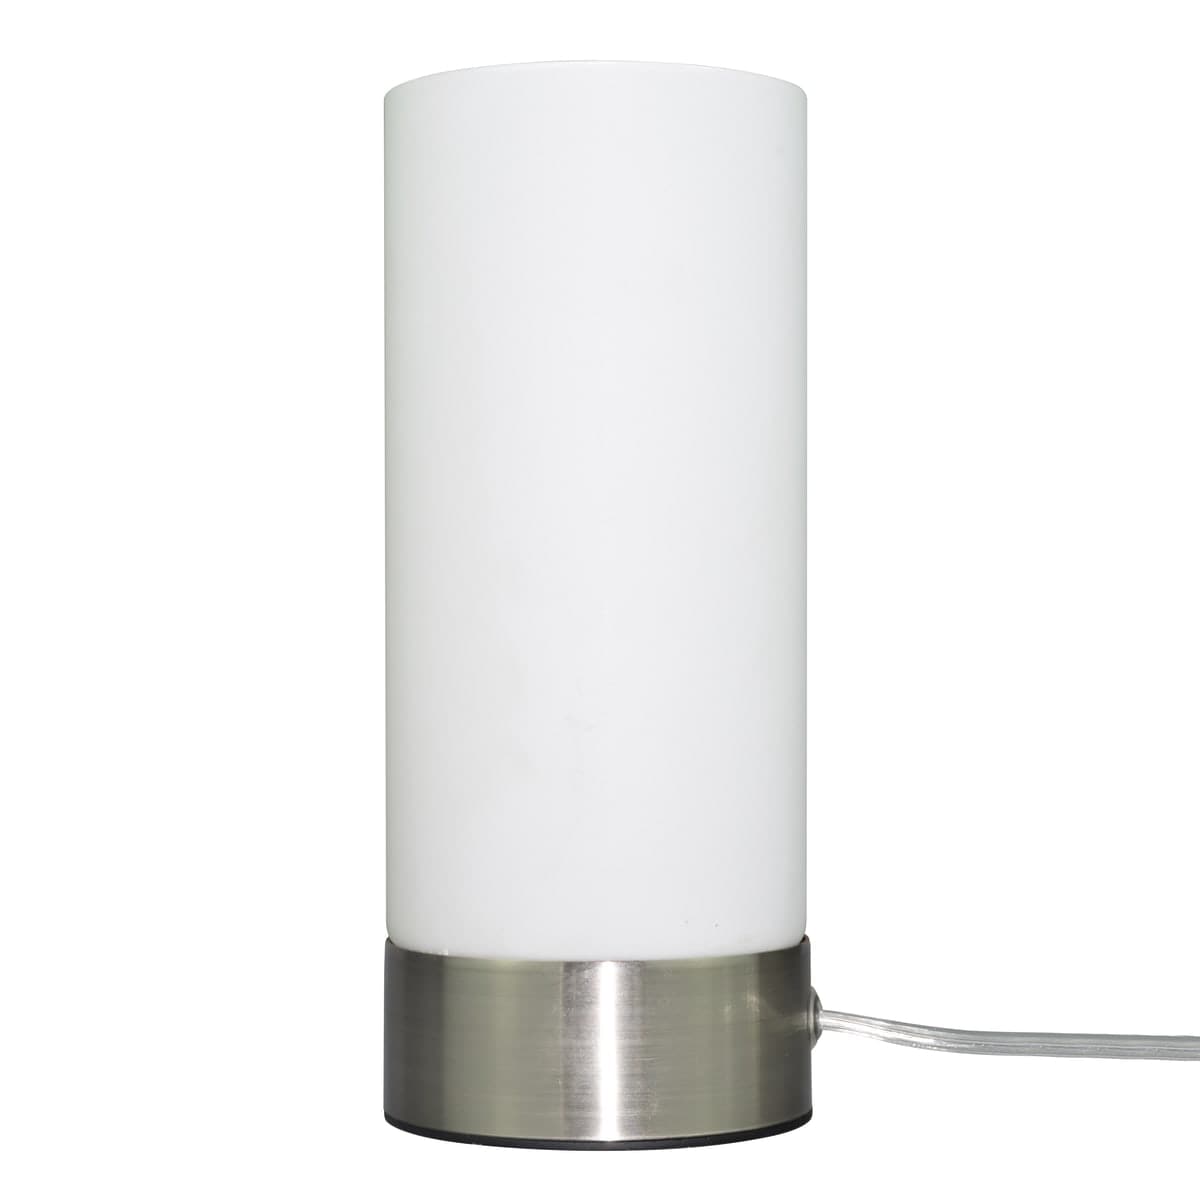 TABLE LAMP TOUCH GLASS WHITE H24 LED=36W DIMMABLE - best price from Maltashopper.com BR420000947